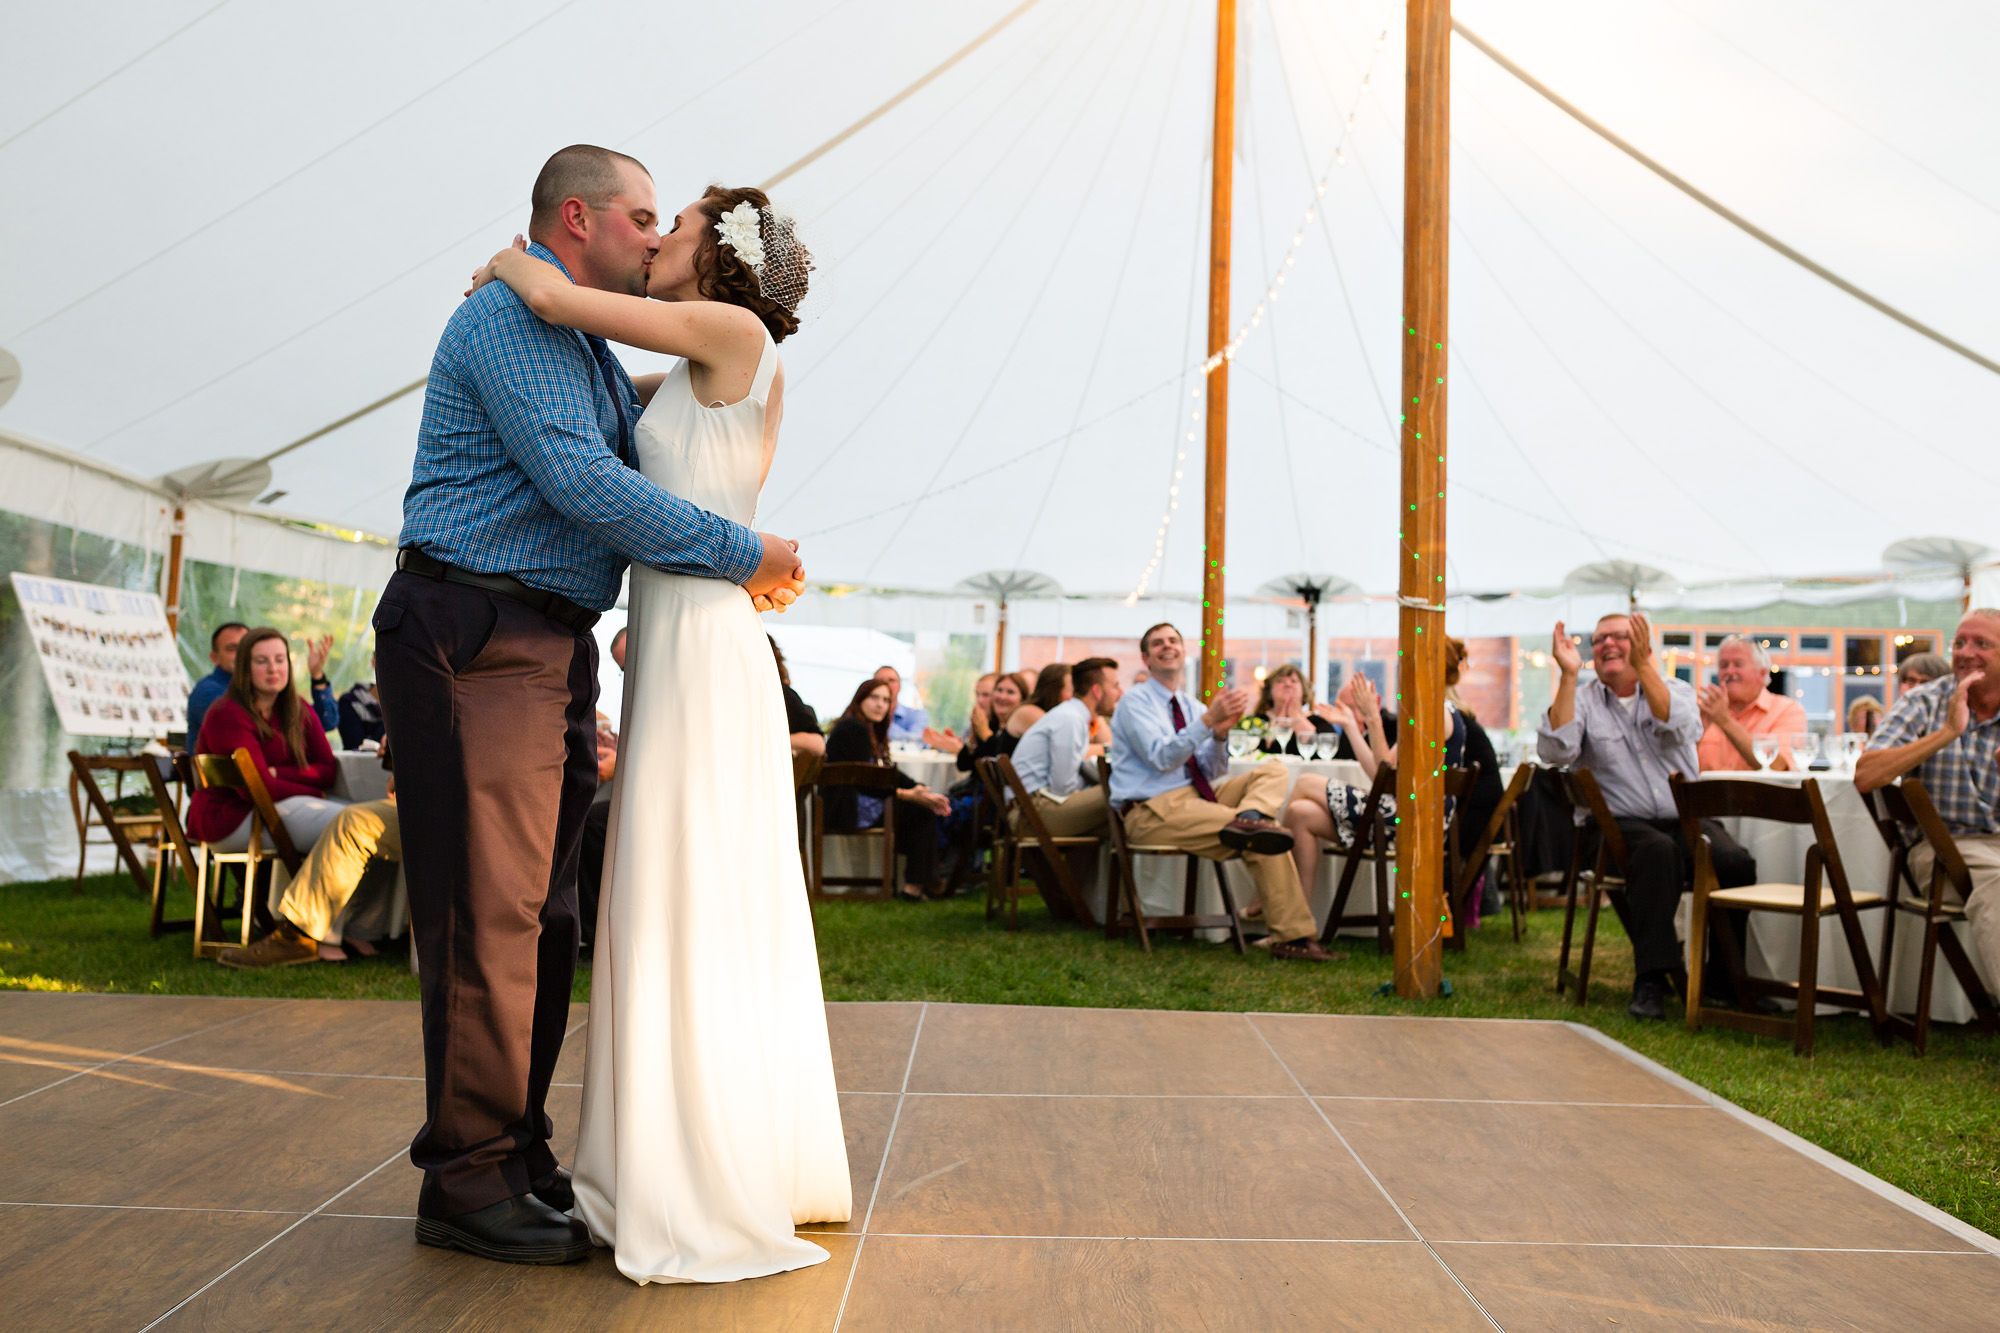 A beautiful first dance at a tented wedding in Maine